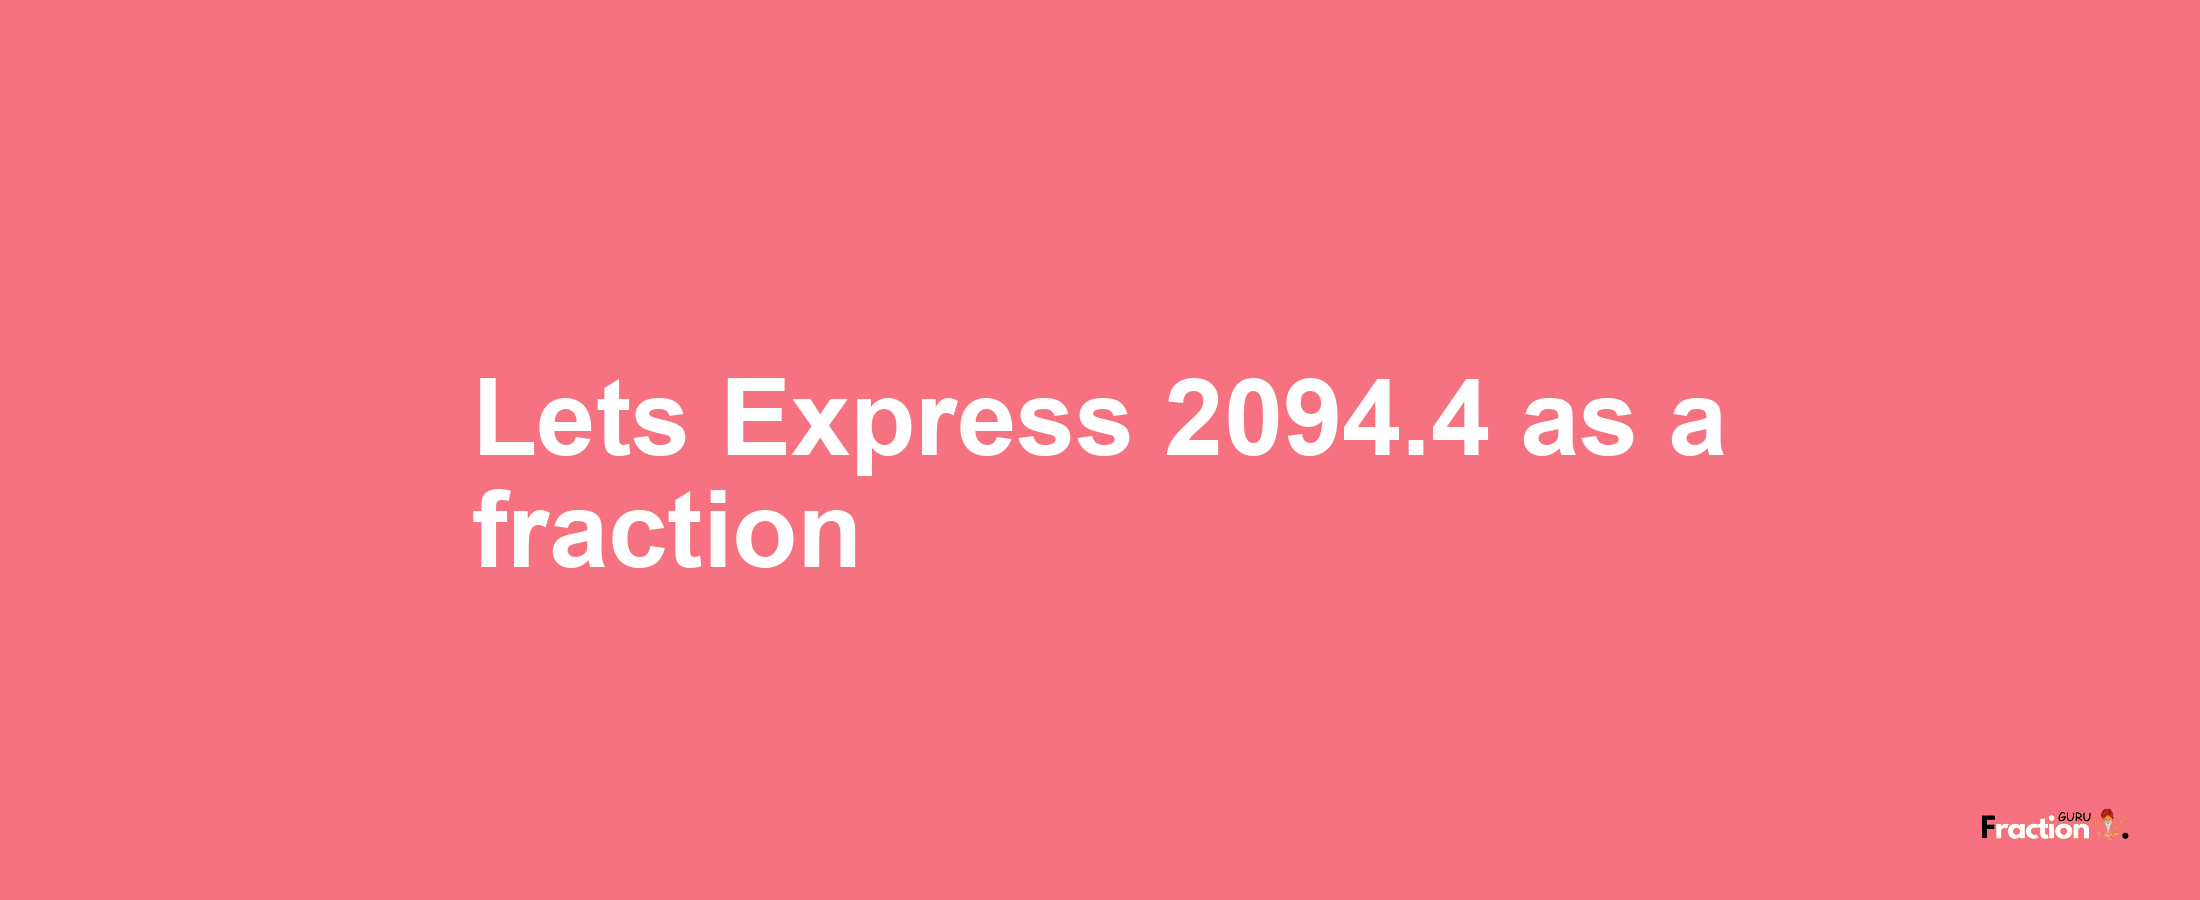 Lets Express 2094.4 as afraction